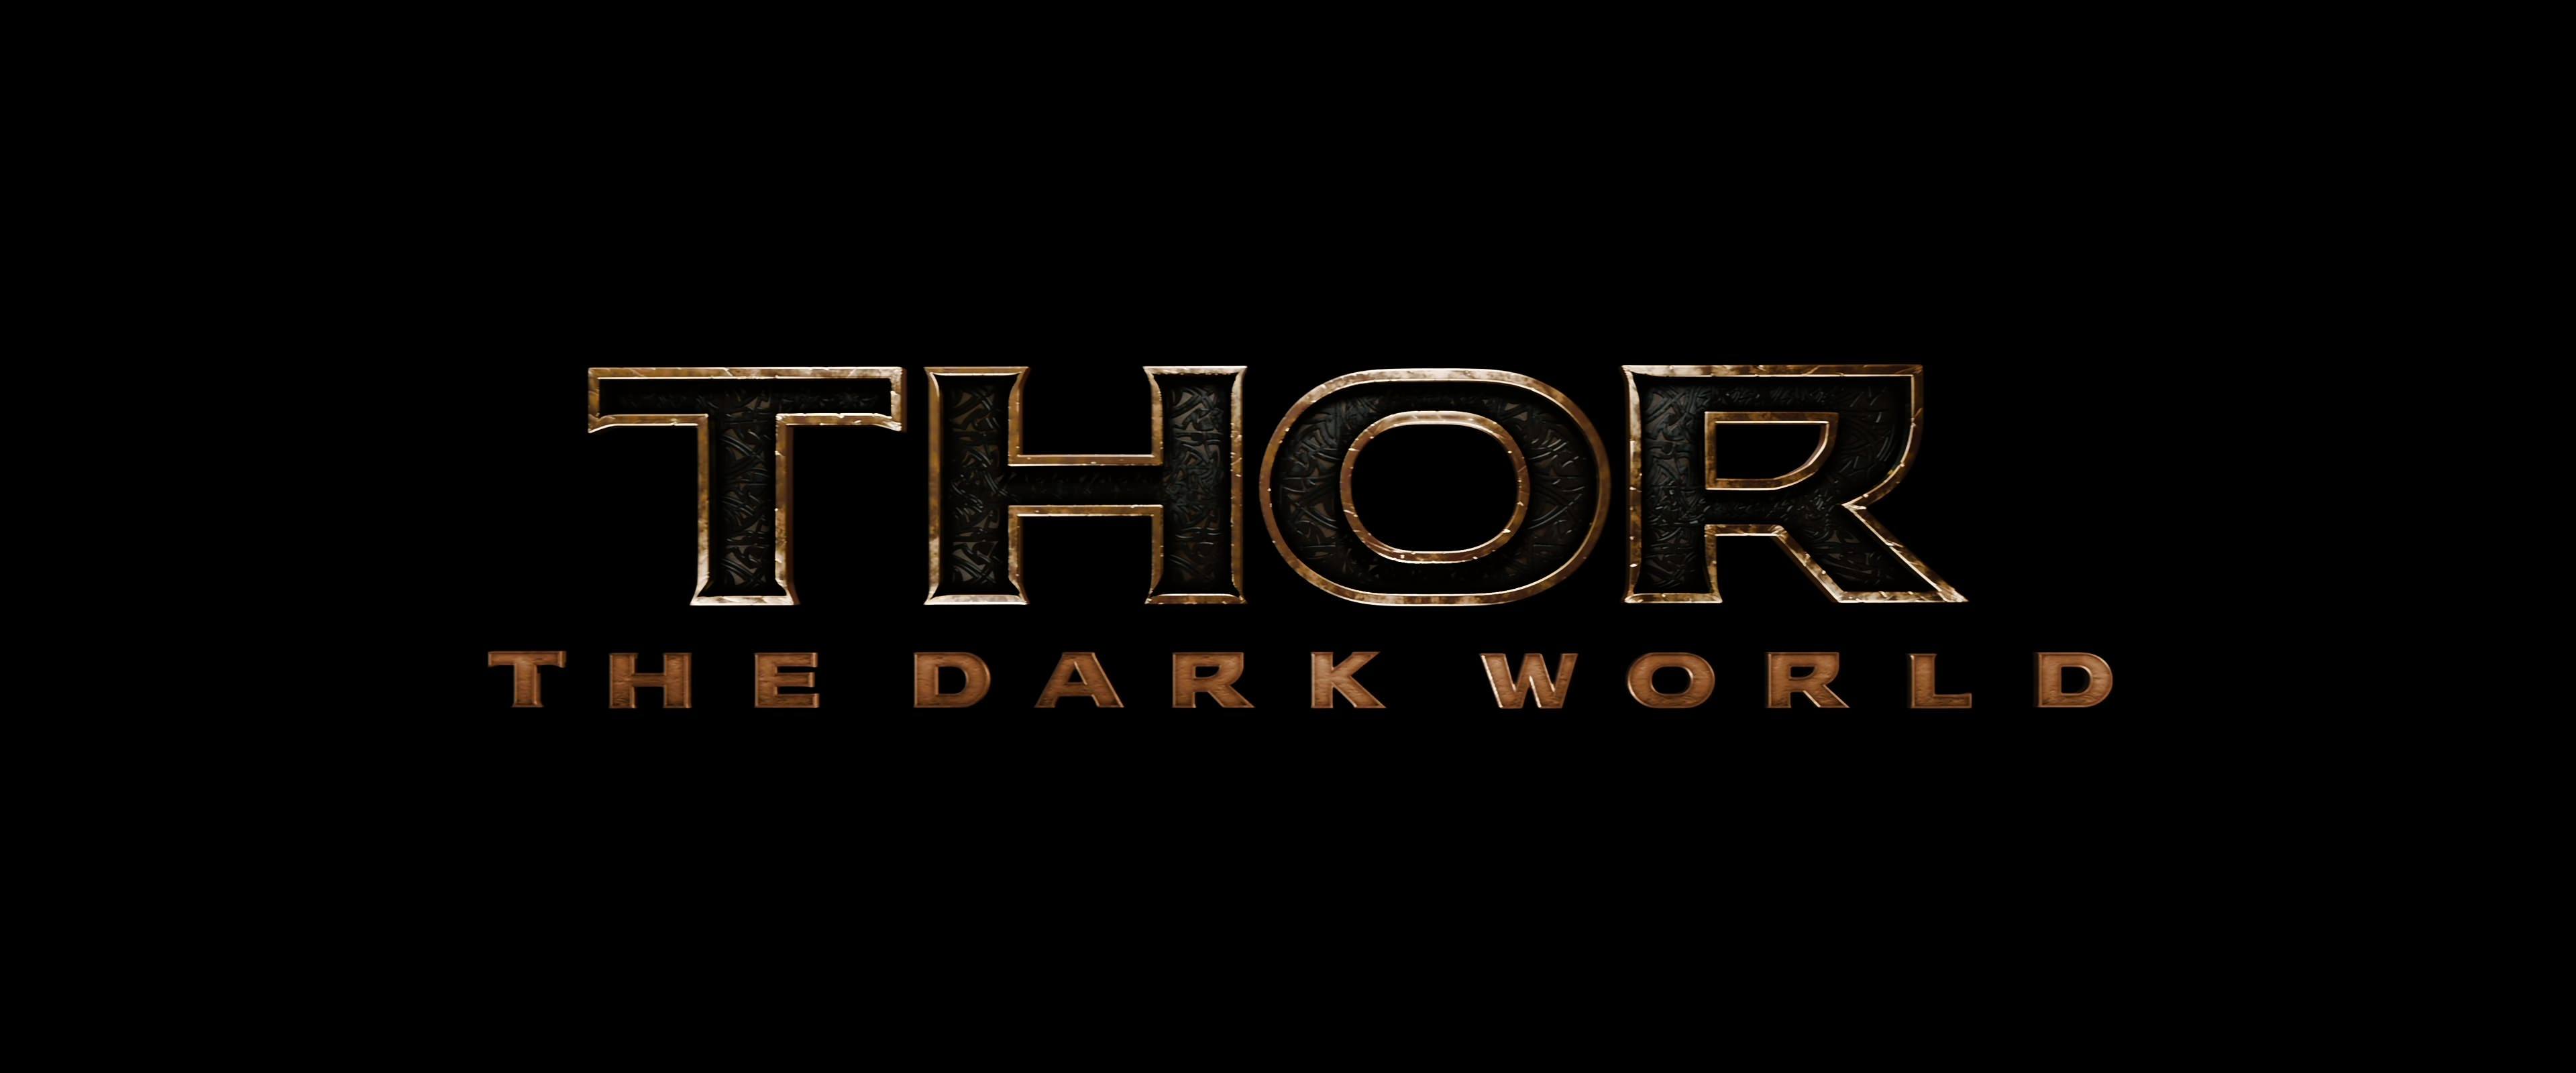 Thor: The Dark World | Film and Television Wikia | FANDOM powered by Wikia